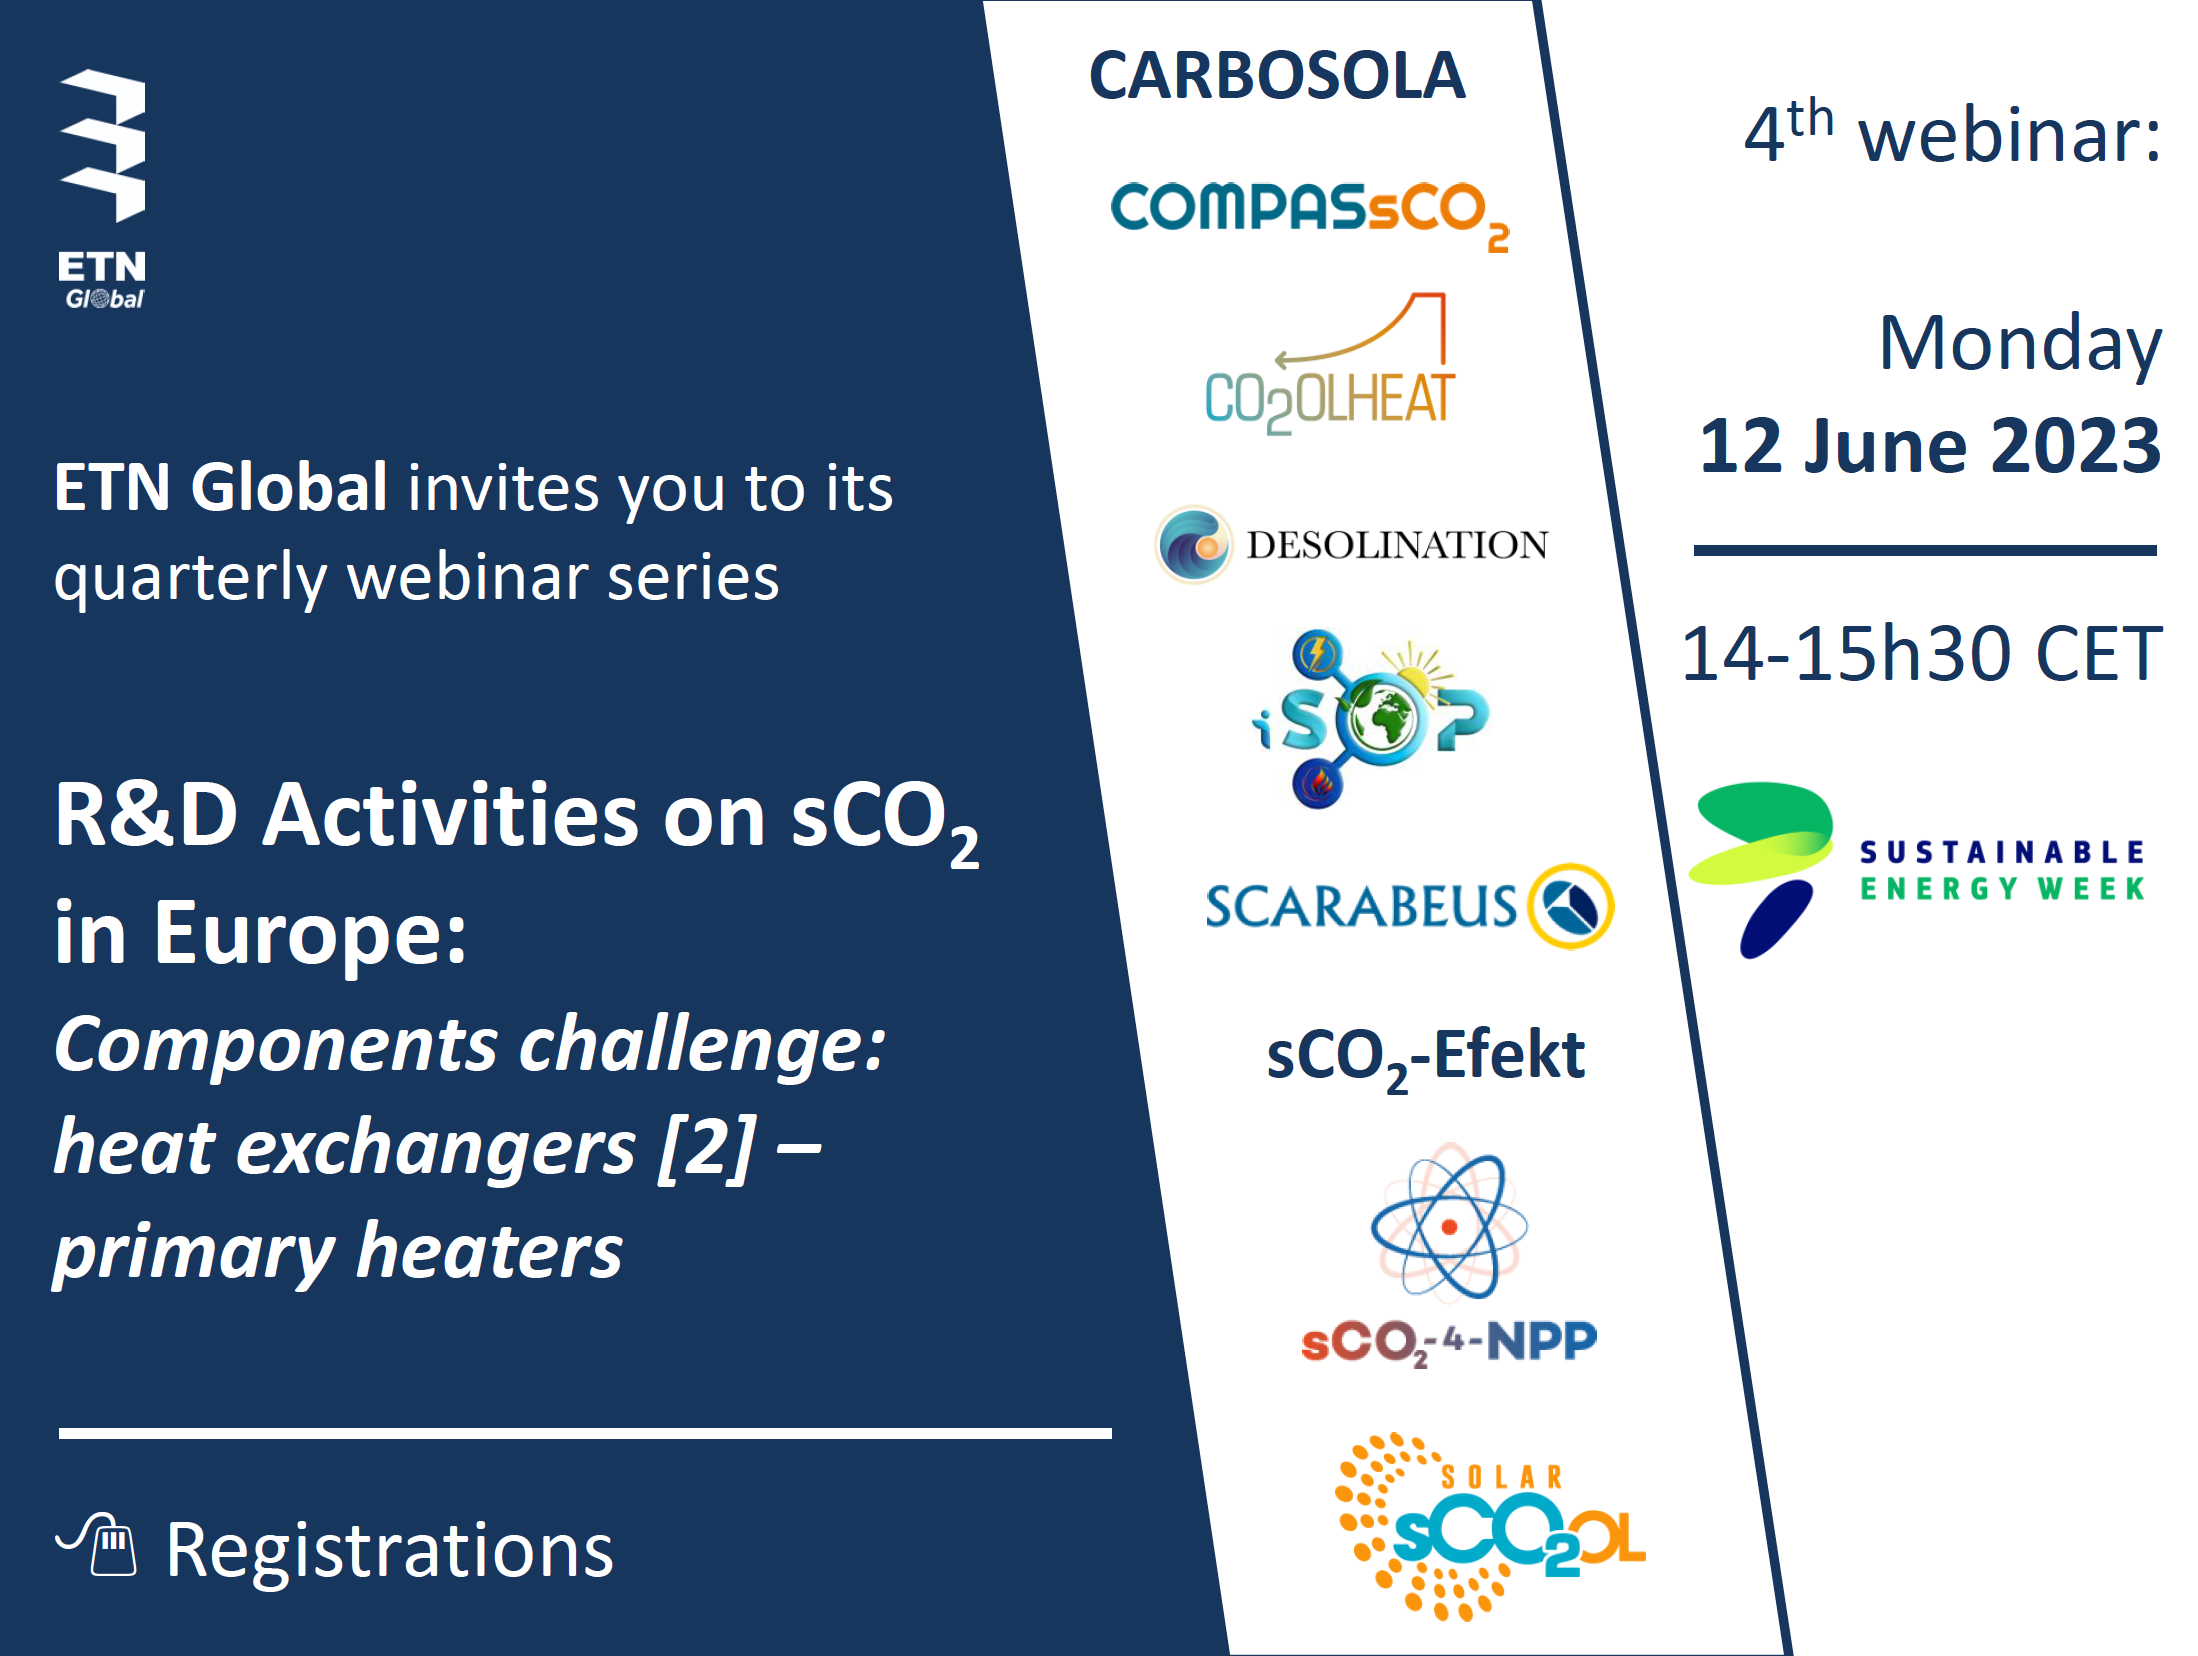 ISOP joins the webinar series on R&D Activities on sCO2 in Europe organized by ETN Global – Next Episode to take place on Monday, June 12th